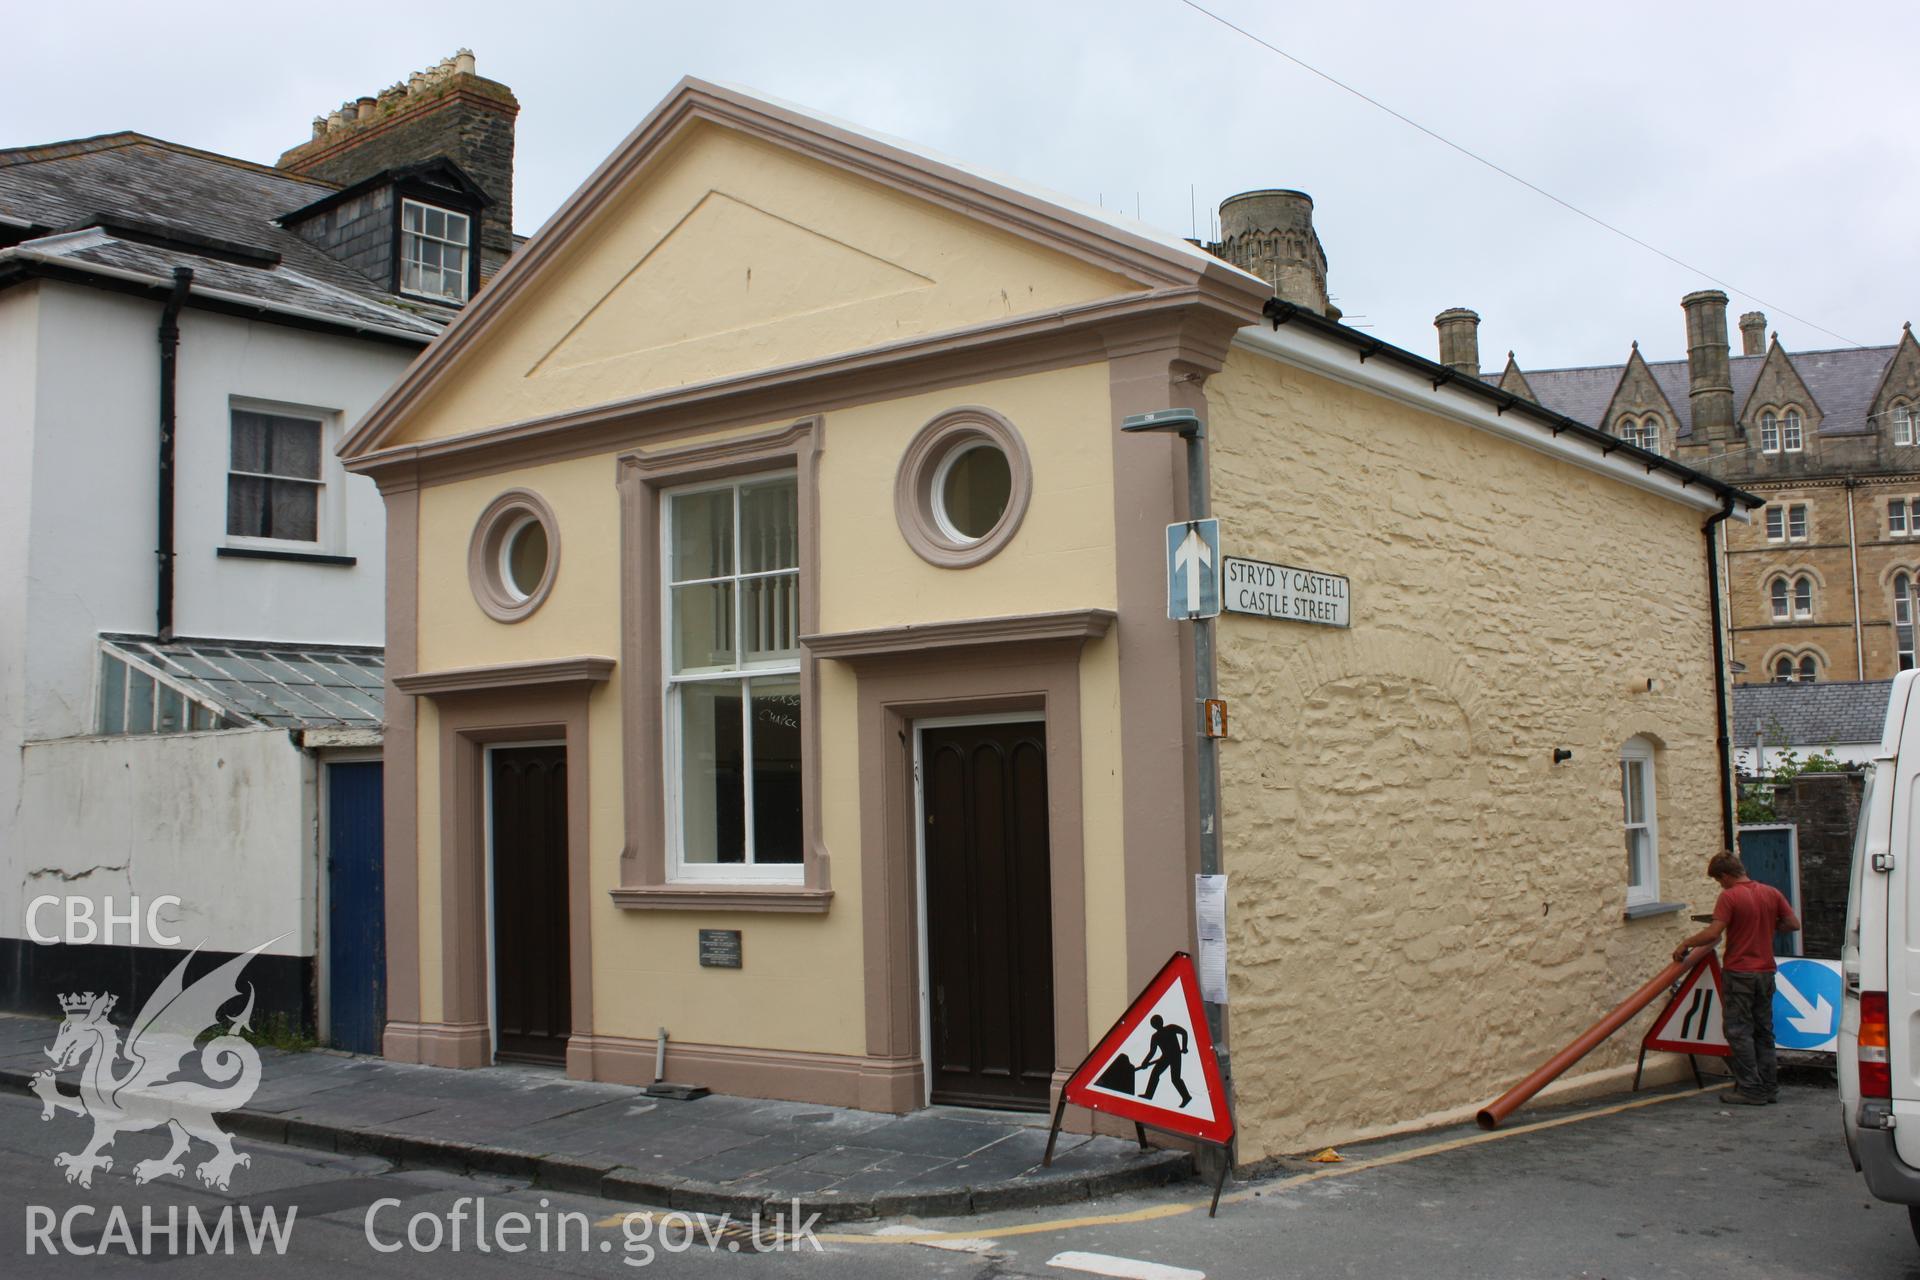 Colour photograph showing exterior of New Street Chapel, Aberystwyth. Photographic survey conducted by Geoff Ward on 8th June 2010